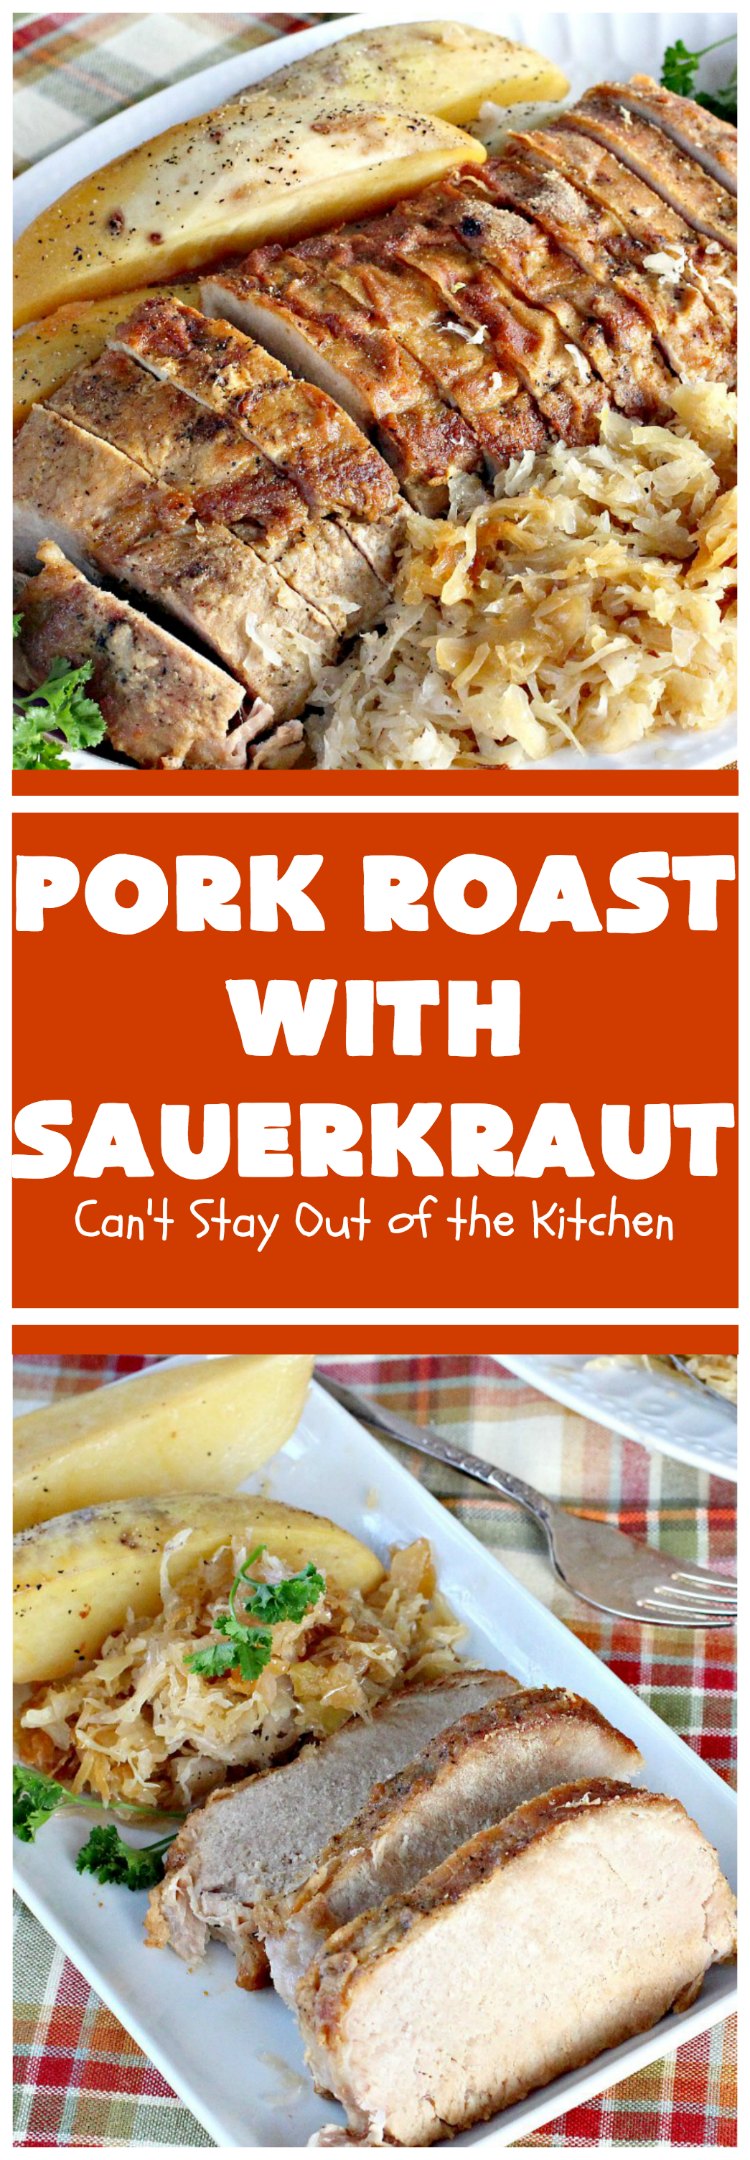 Pork Roast with Sauerkraut | Can't Stay Out of the Kitchen | our favorite comfort food when we were growing up. This is terrific for #Easter & company dinners. Uses only a handful of ingredients so it's very easy. #glutenfree #sauerkraut #pork 